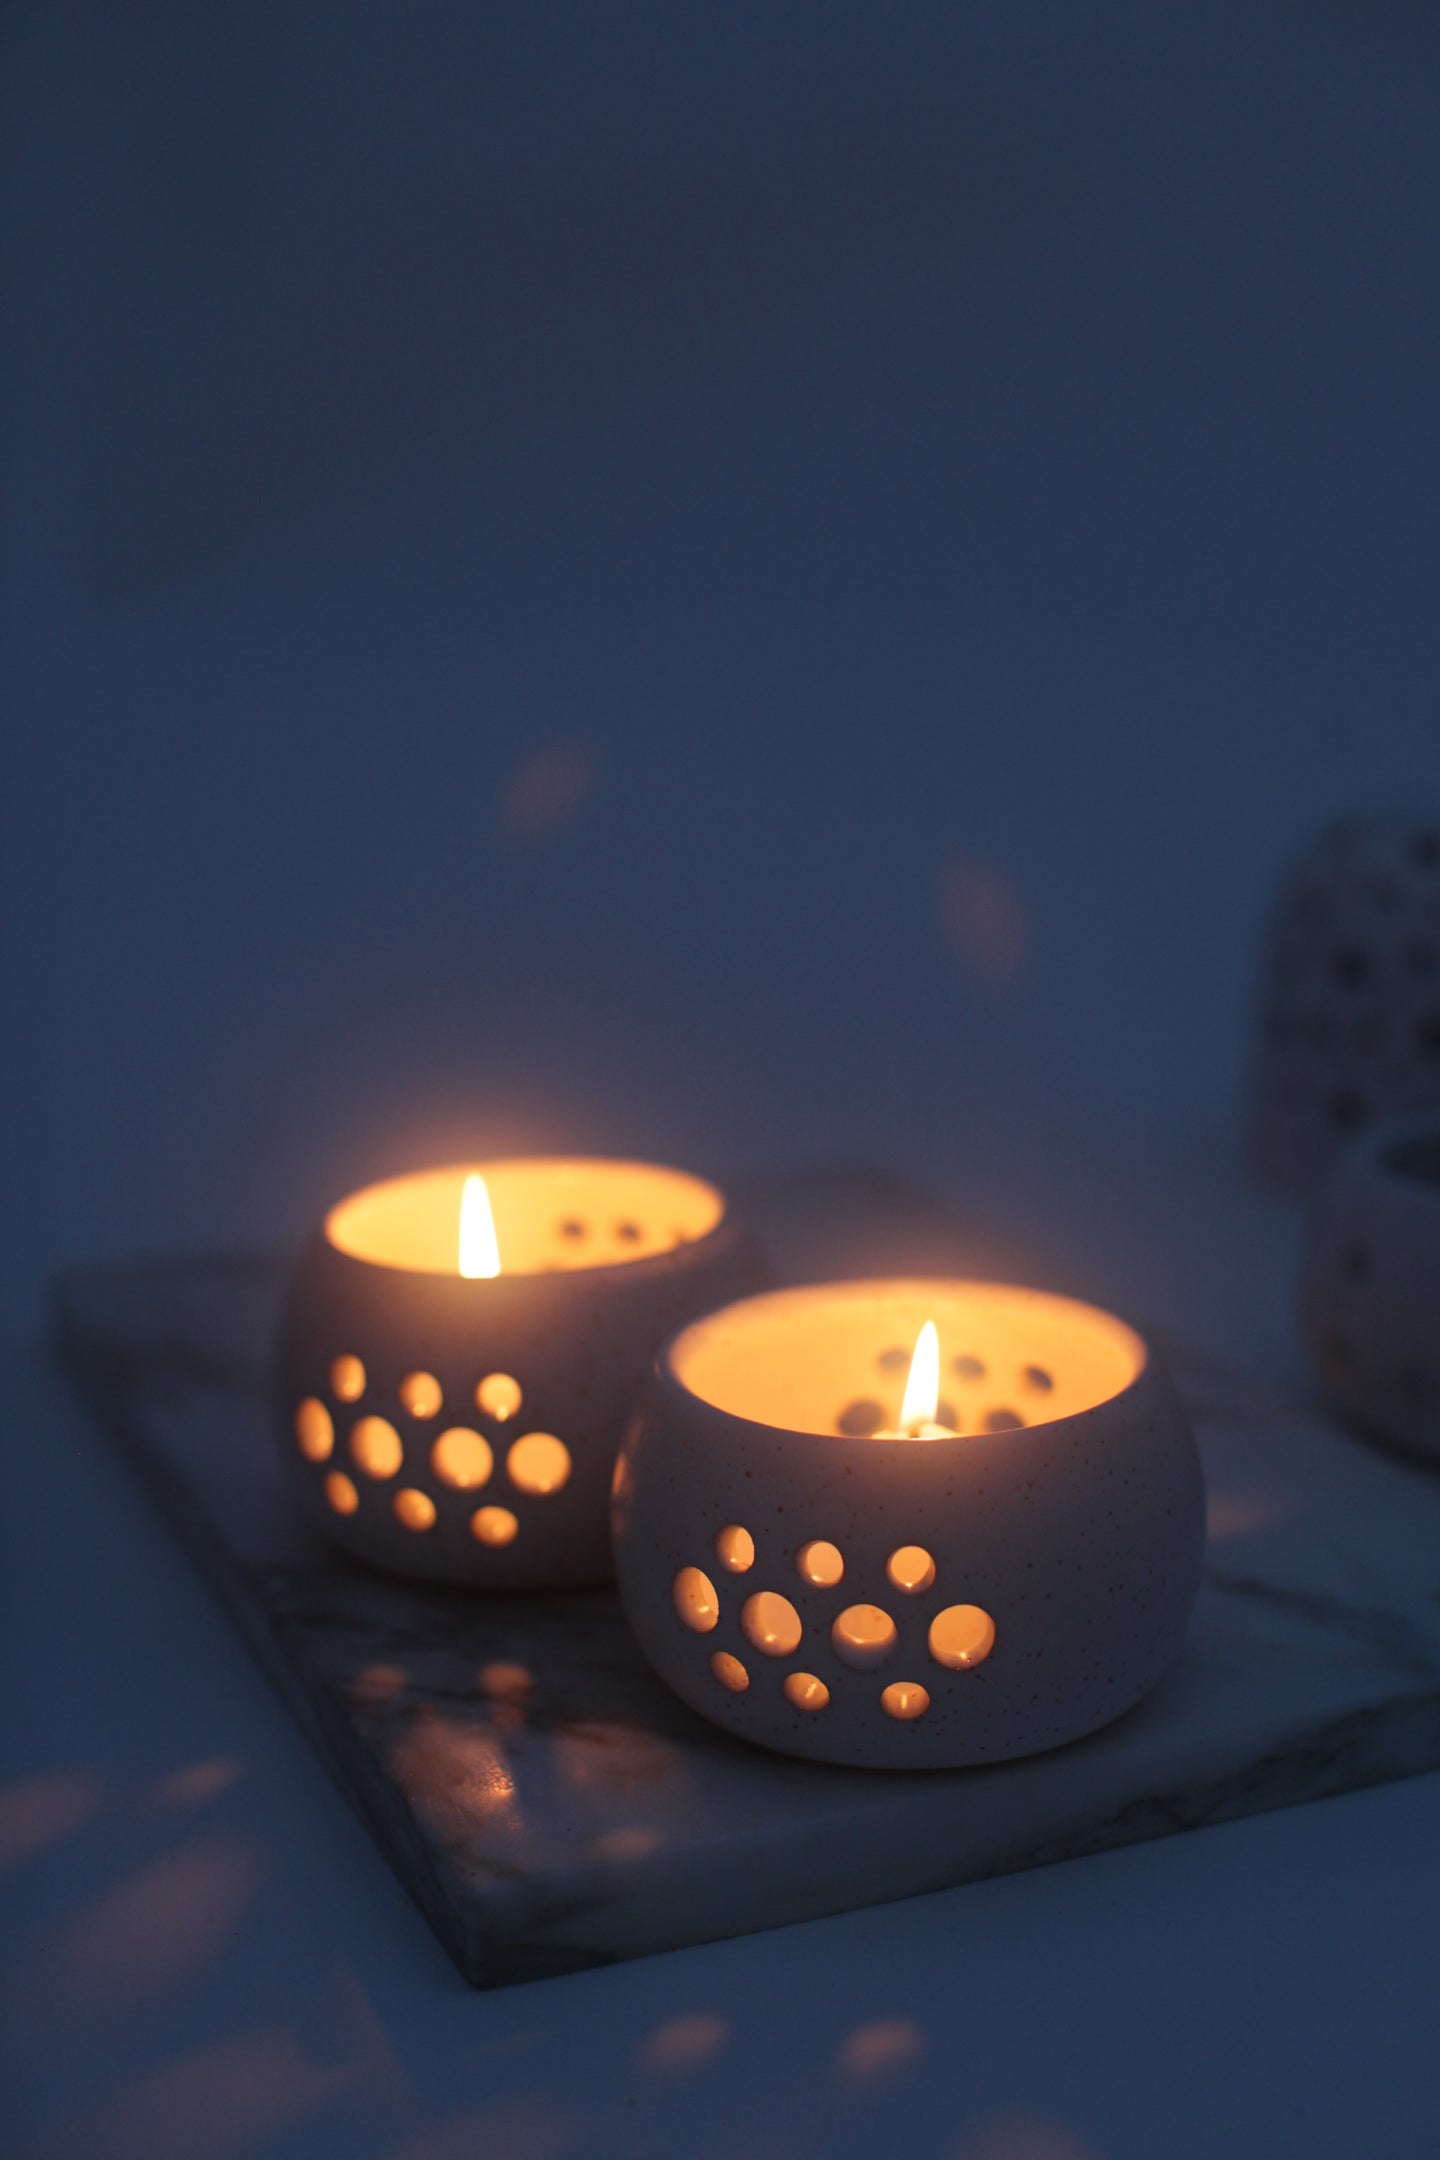 Tea Light Candle Holder - Rounded